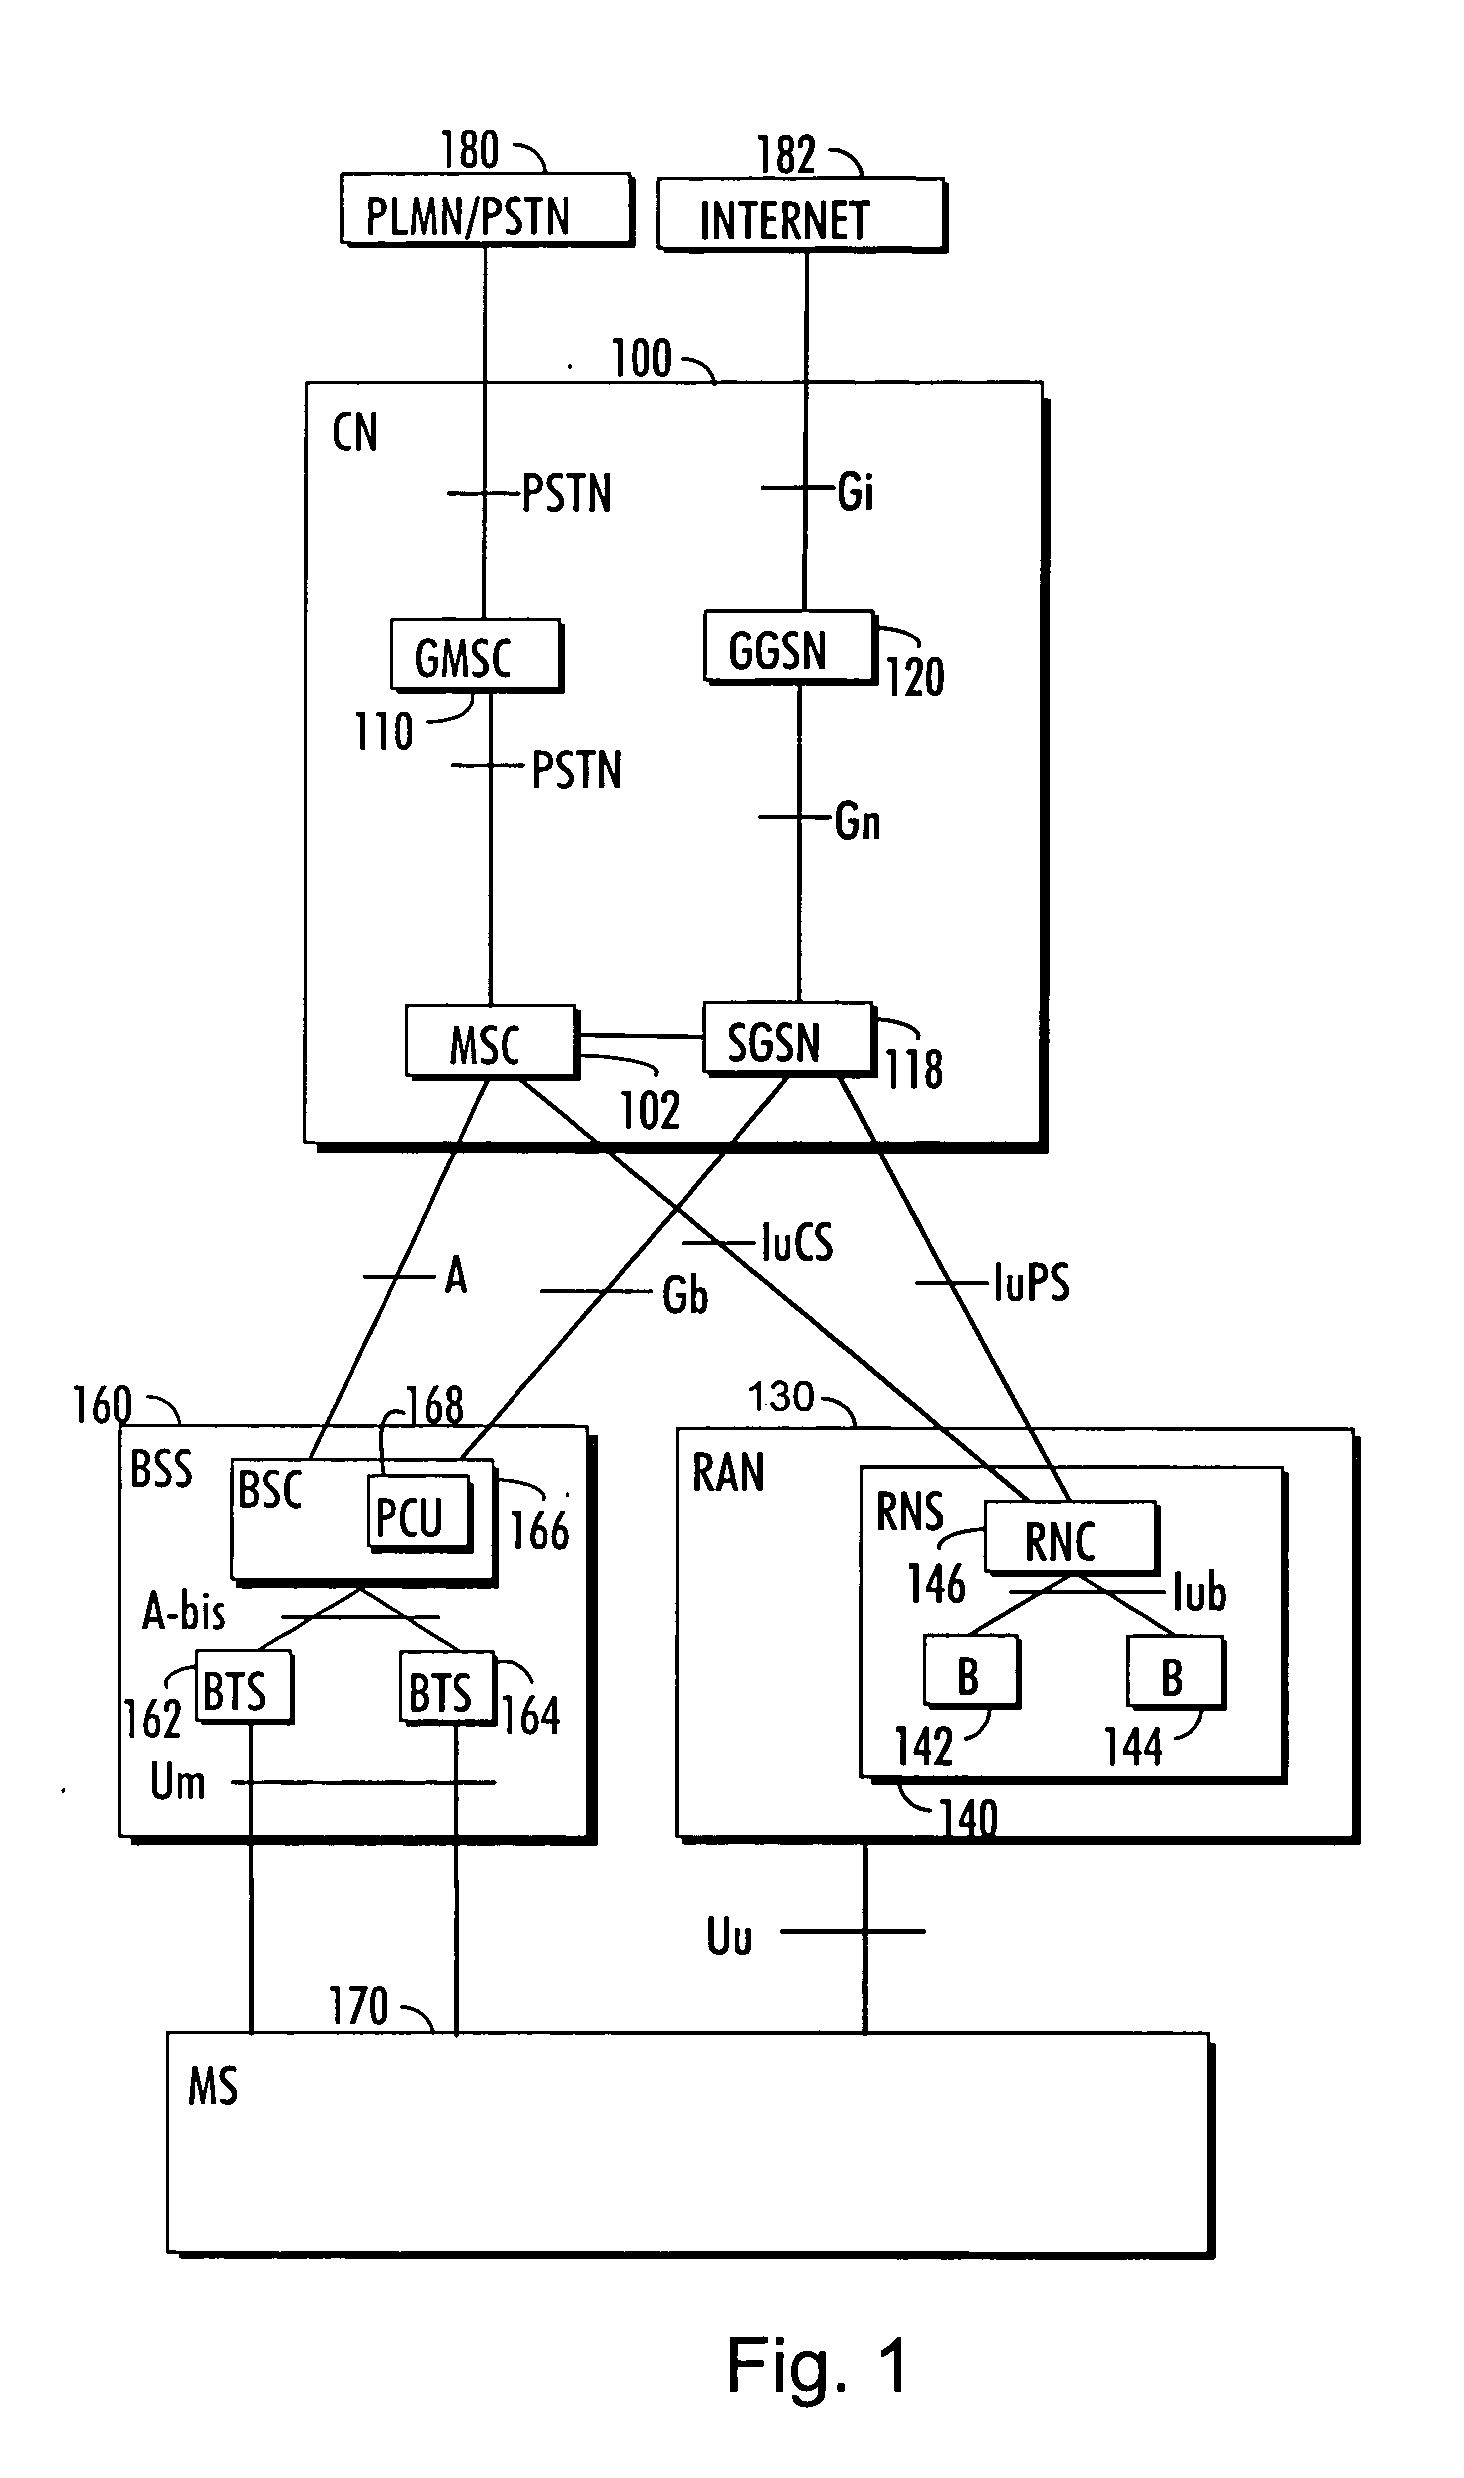 Method of controlling data transmission, radio system, packet control unit, and remote network element